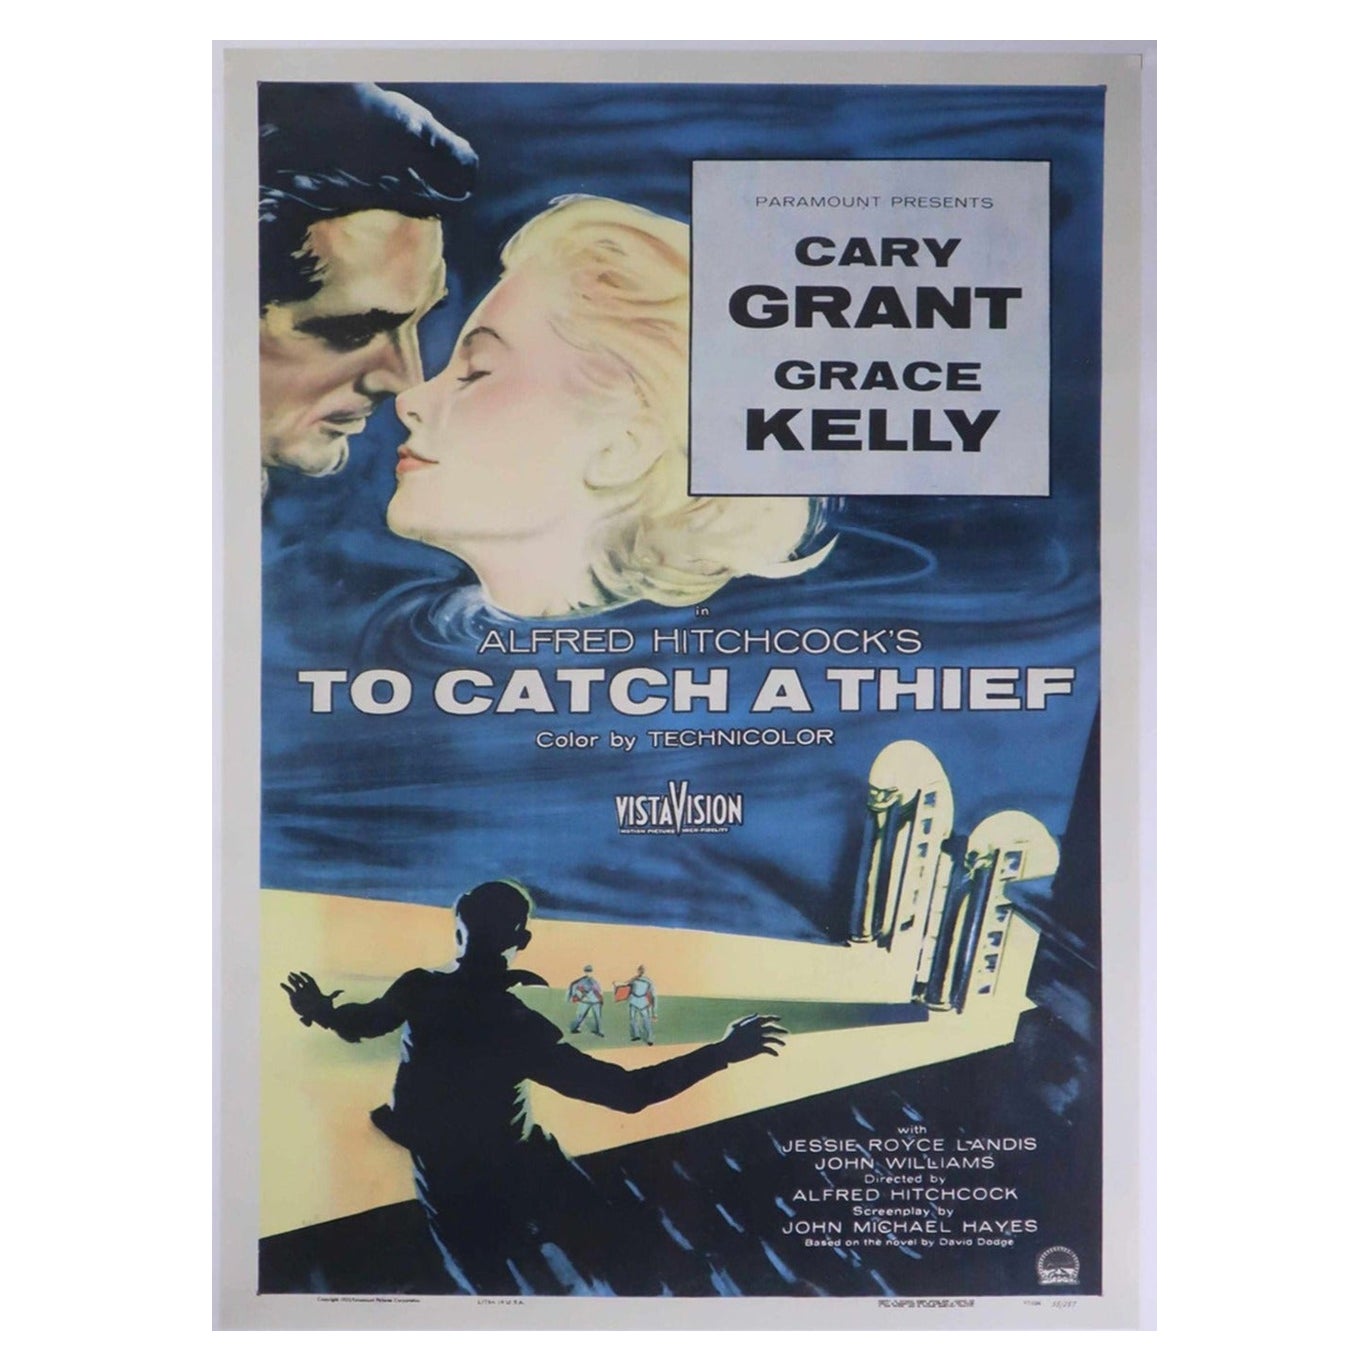 1955 To Catch a Thief Original Vintage Poster For Sale